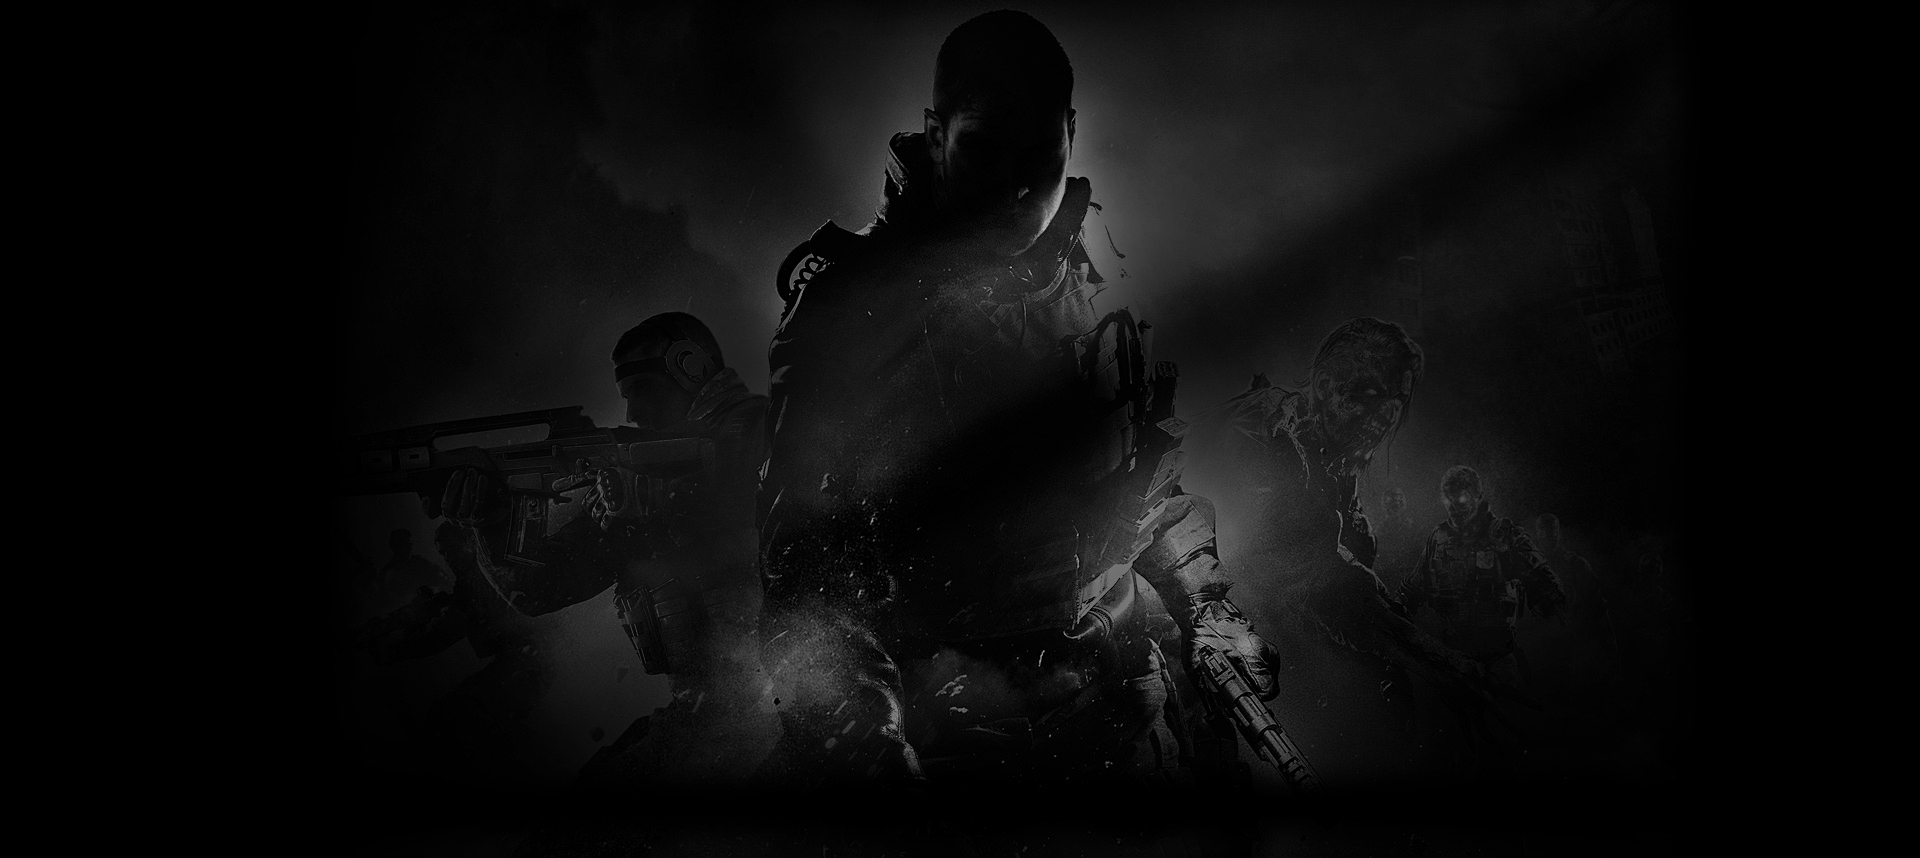 Description From Call Of Duty Black Ops Background Wallpaper